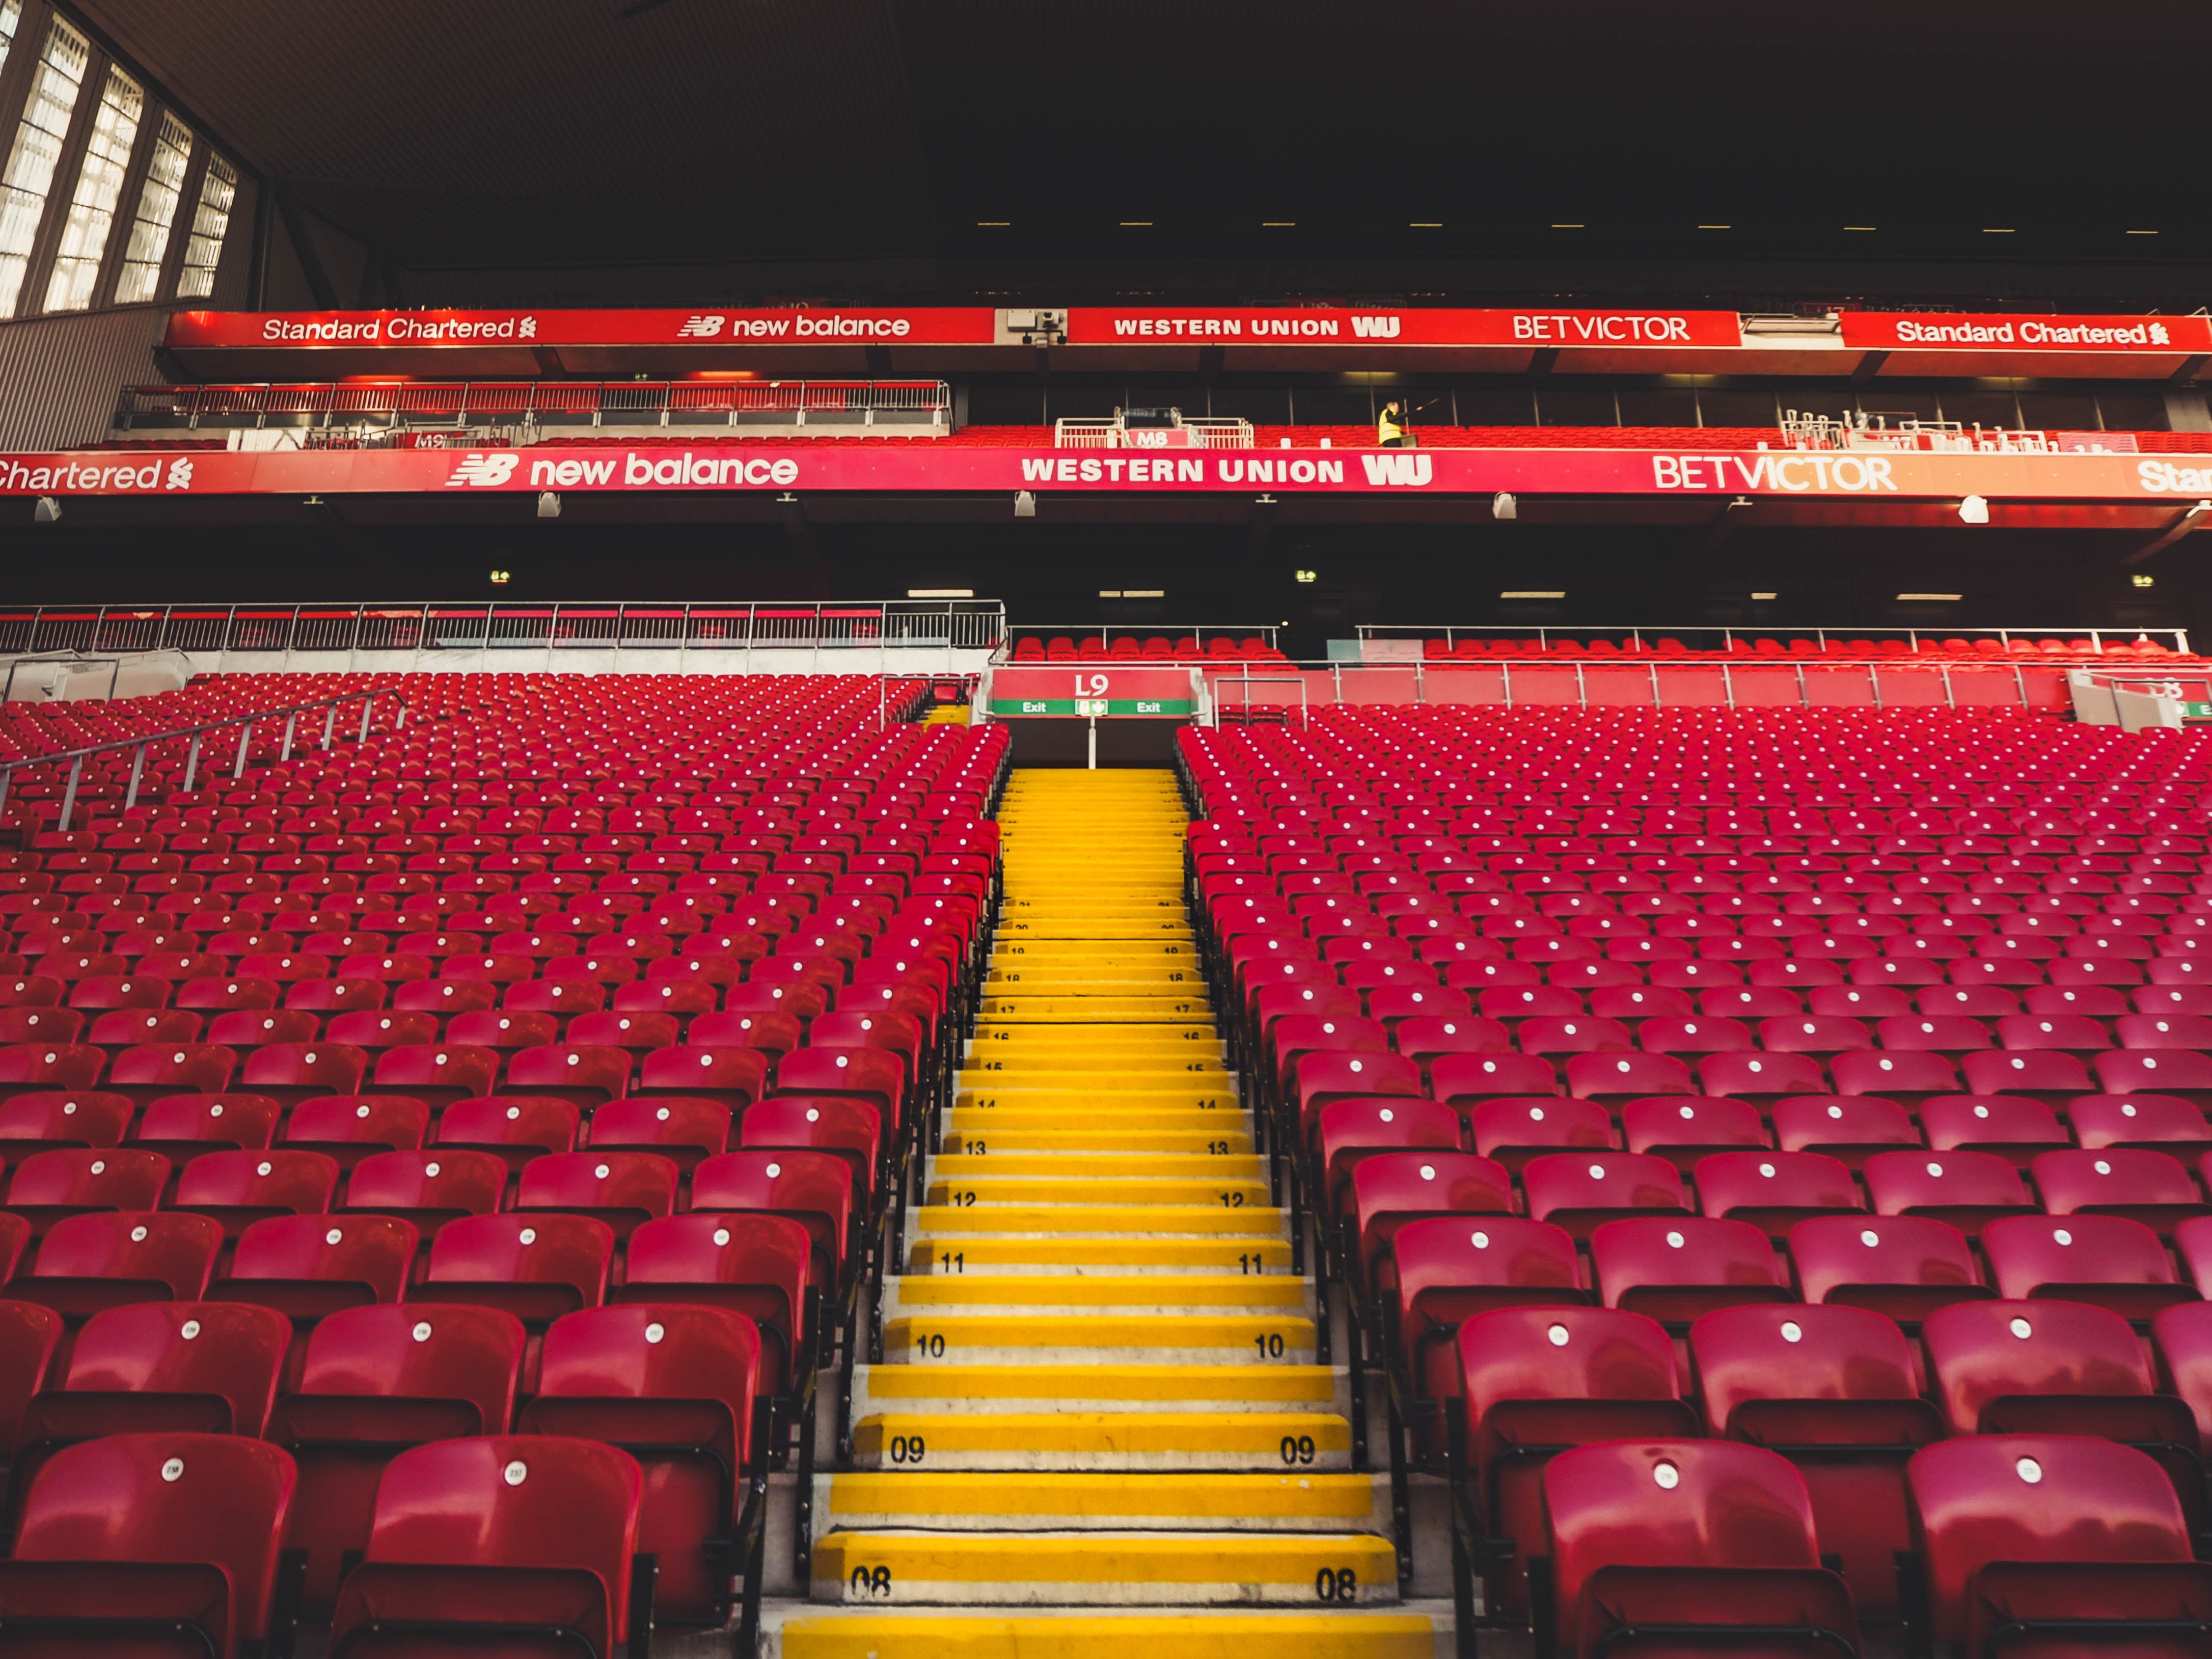 Seats at Anfield Stadium, the home of Liverpool FC